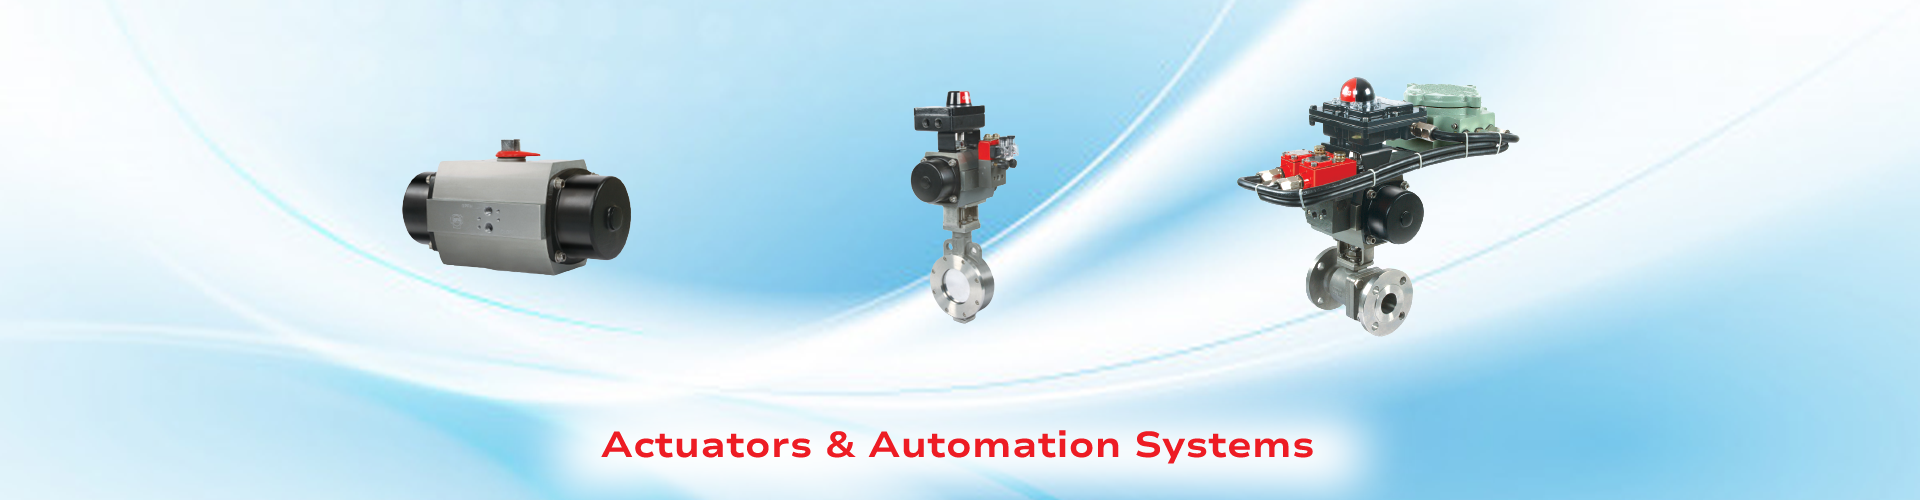 Actuators and Automation Systems